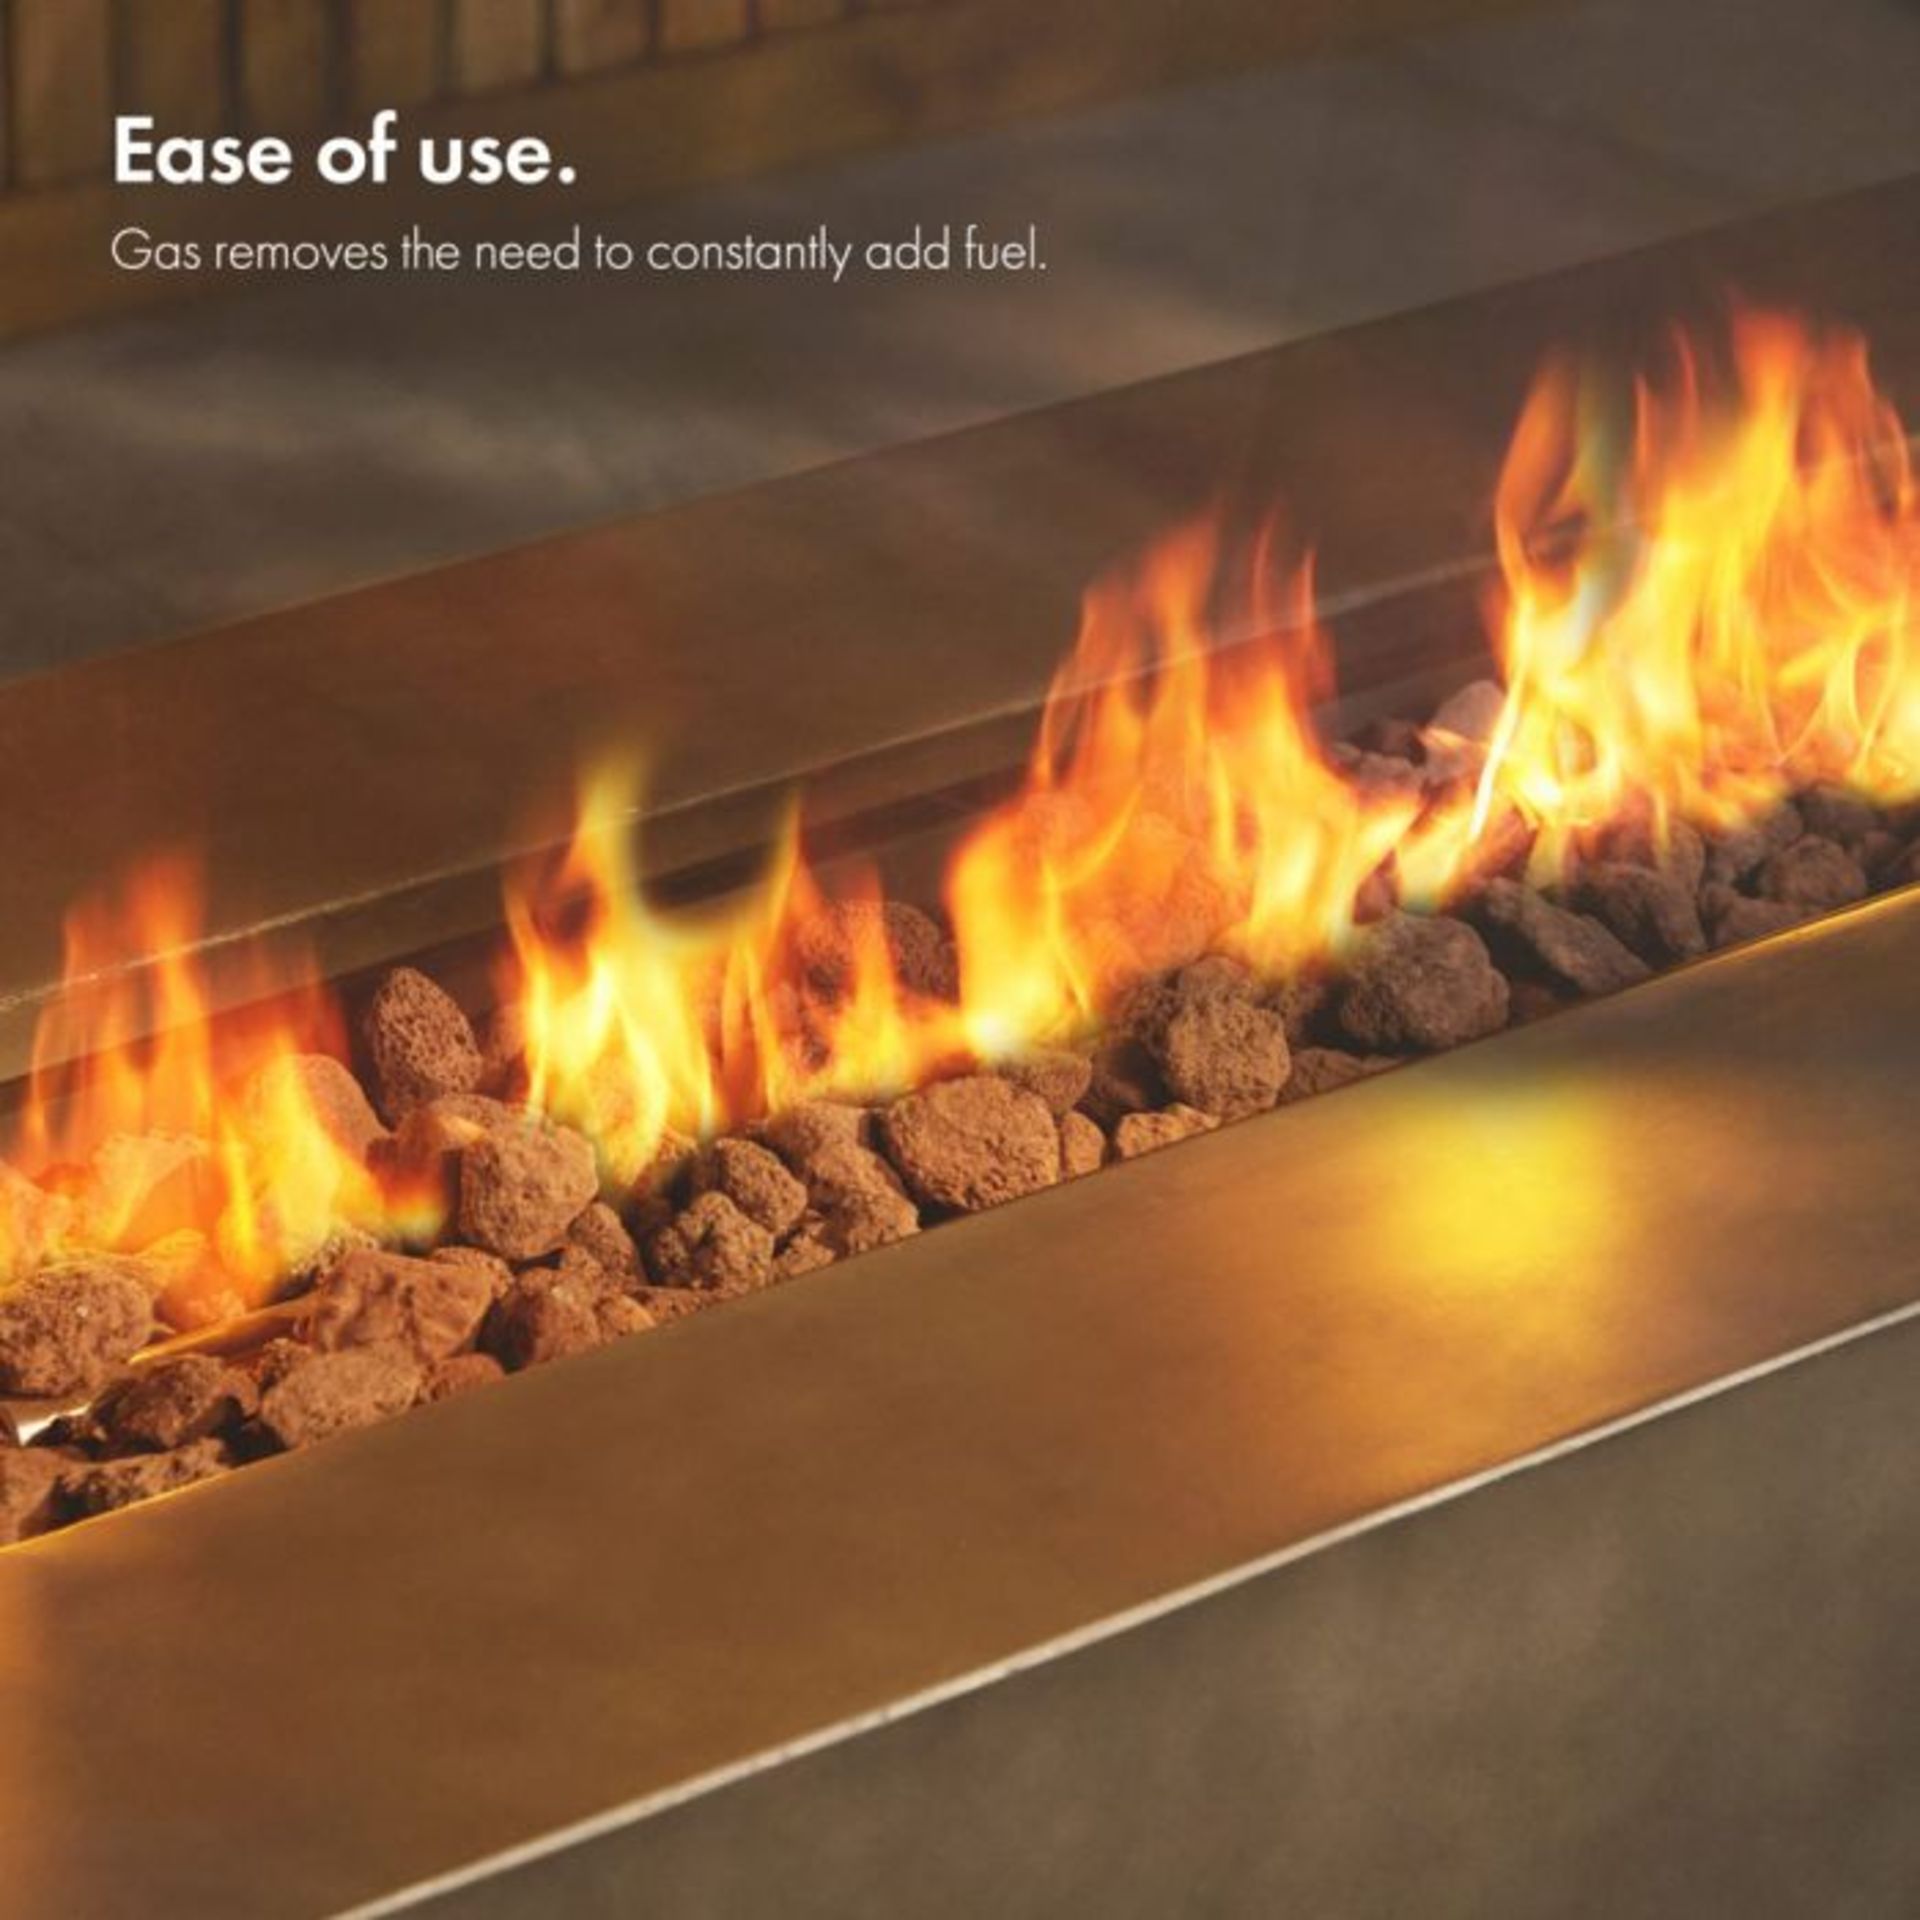 New Boxed - Luxe Rectangle Gas Fire Pit. .Spend nights around the fire with this safe and - Image 2 of 2